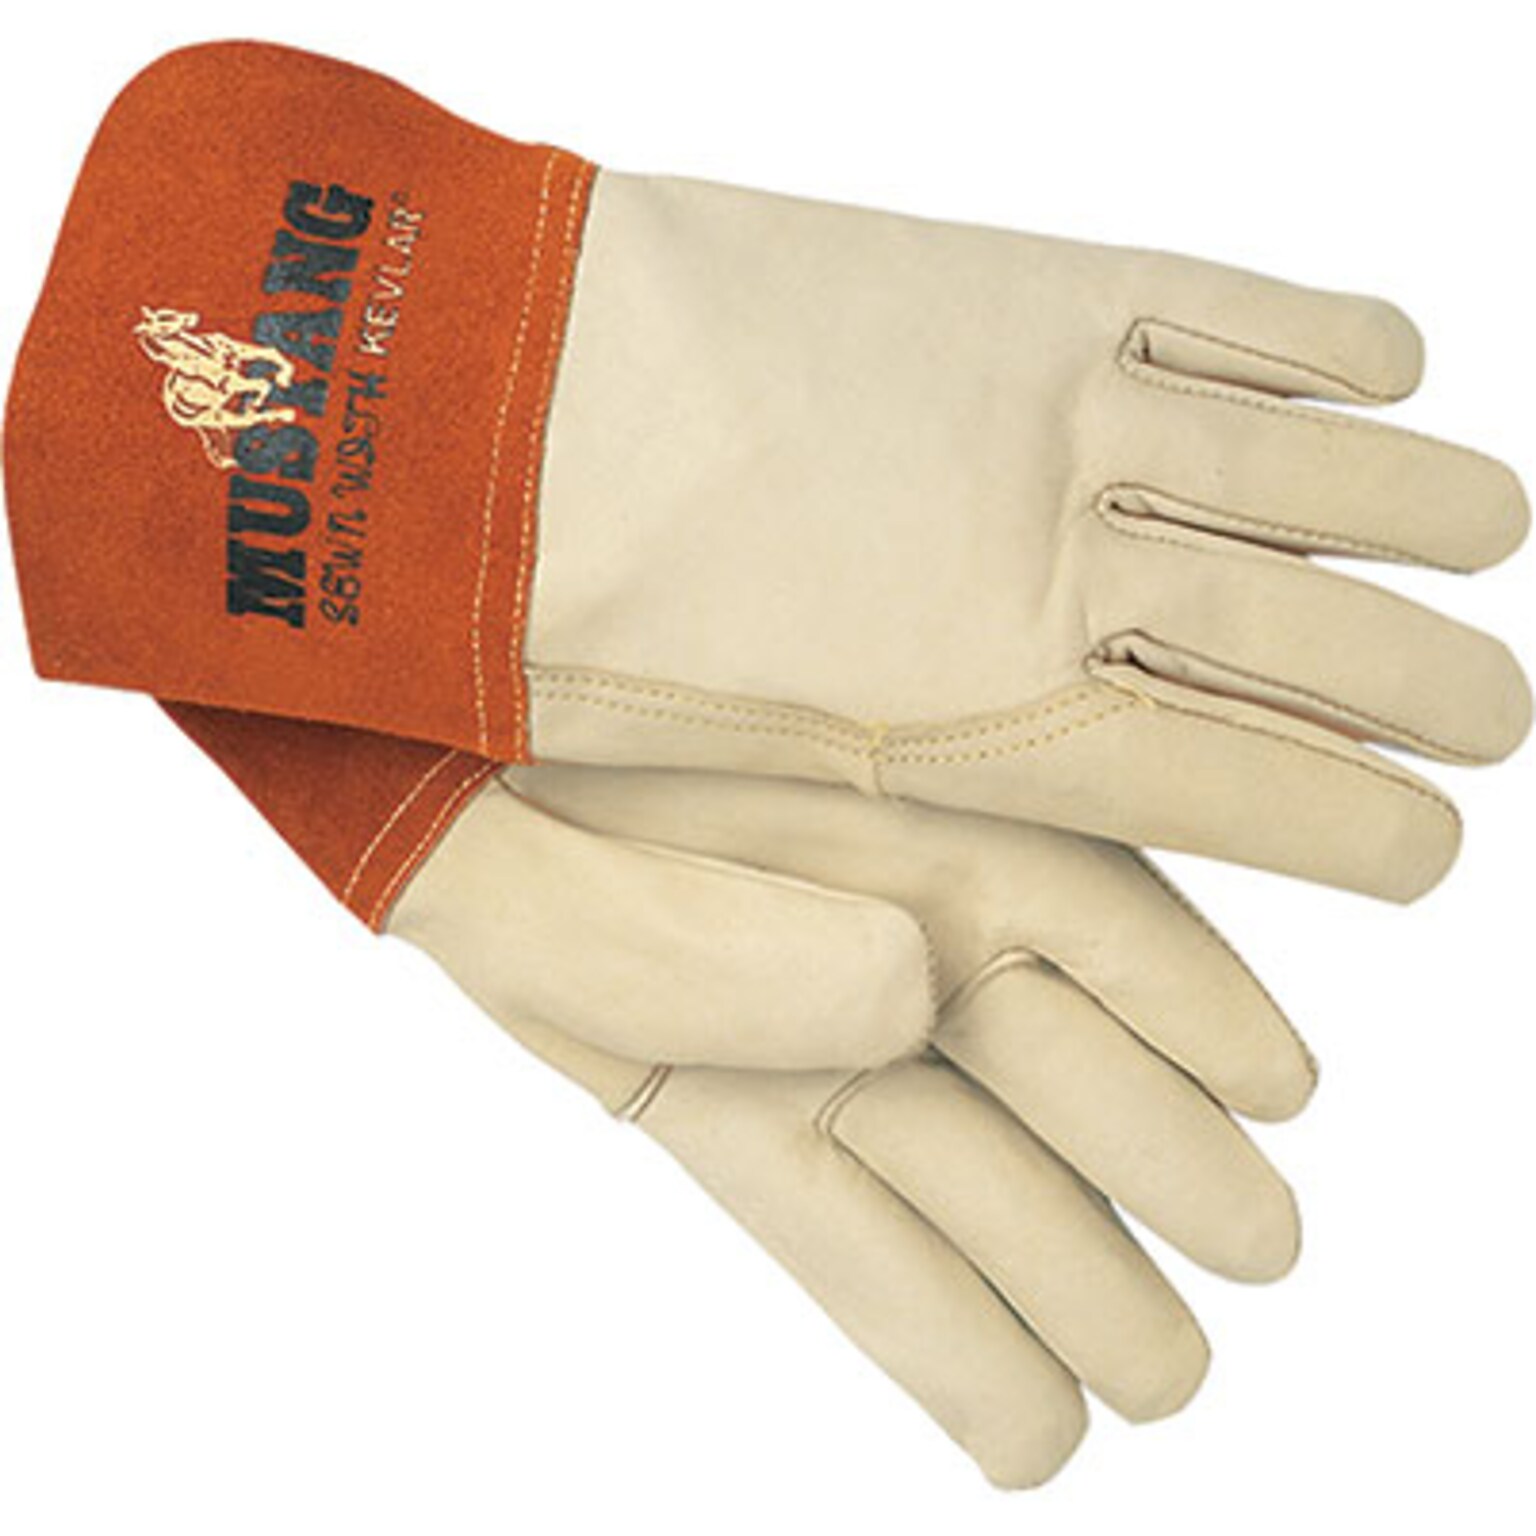 Memphis Gloves Mustang Welding Gloves, Cowhide Leather, Gauntlet Cuff, Cream, Large, 12 Pairs (MPG4950L)